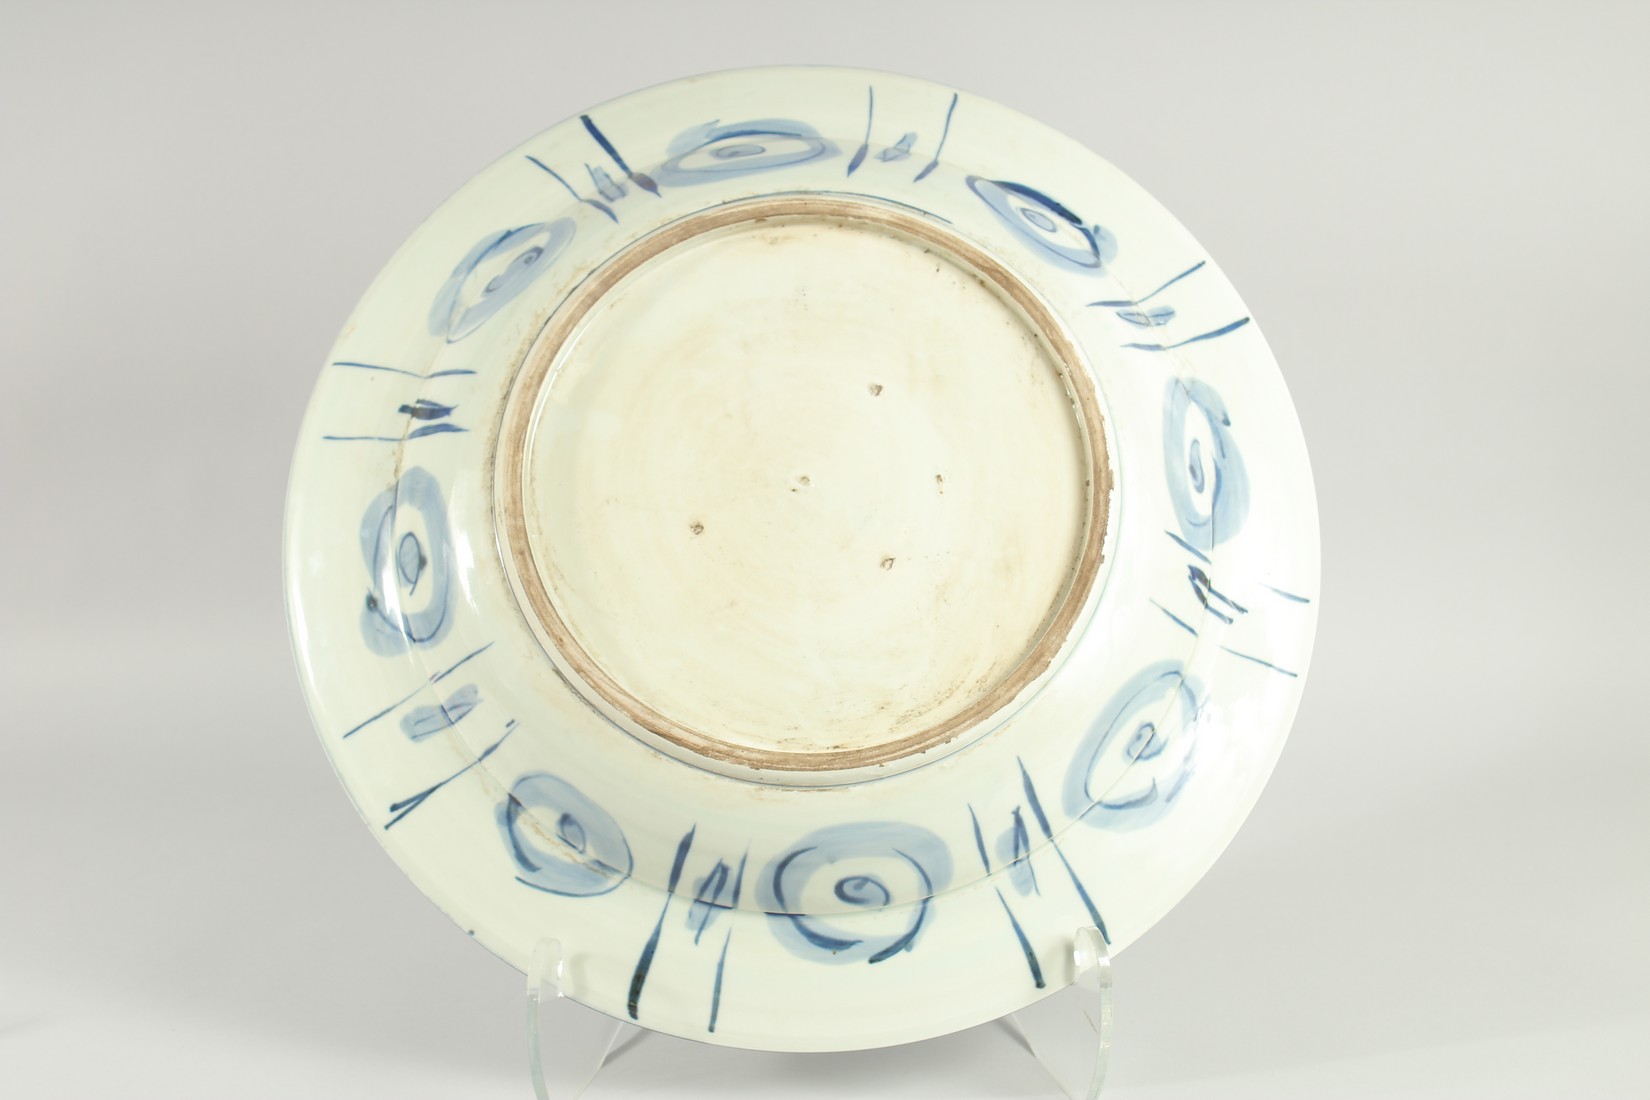 A CHINESE EXPORT BLUE AND WHITE PORCELAIN 'KRAAK' CHARGER, painted with a central panel of a bird - Image 3 of 3